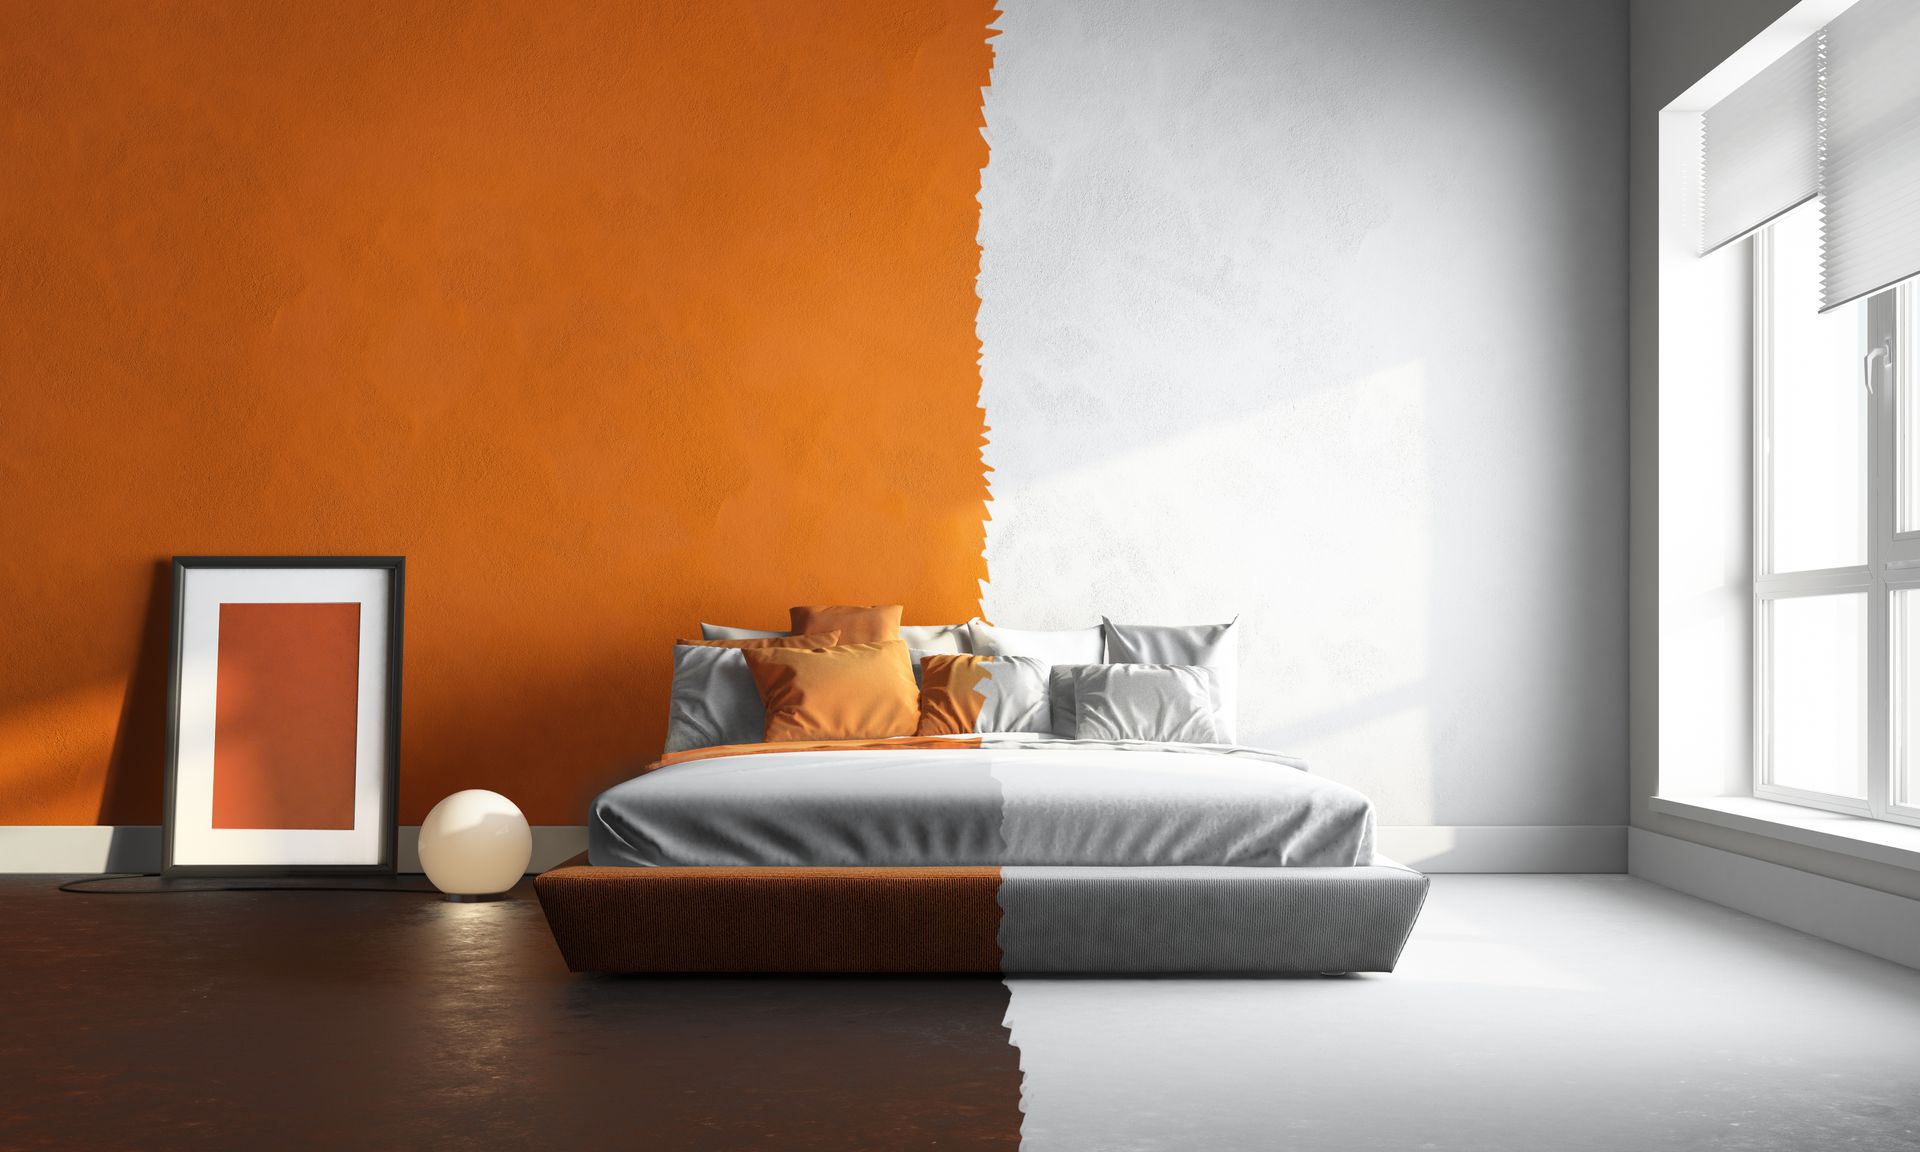 An inviting bedroom with a striking transformation from white to vibrant orange interior painting.